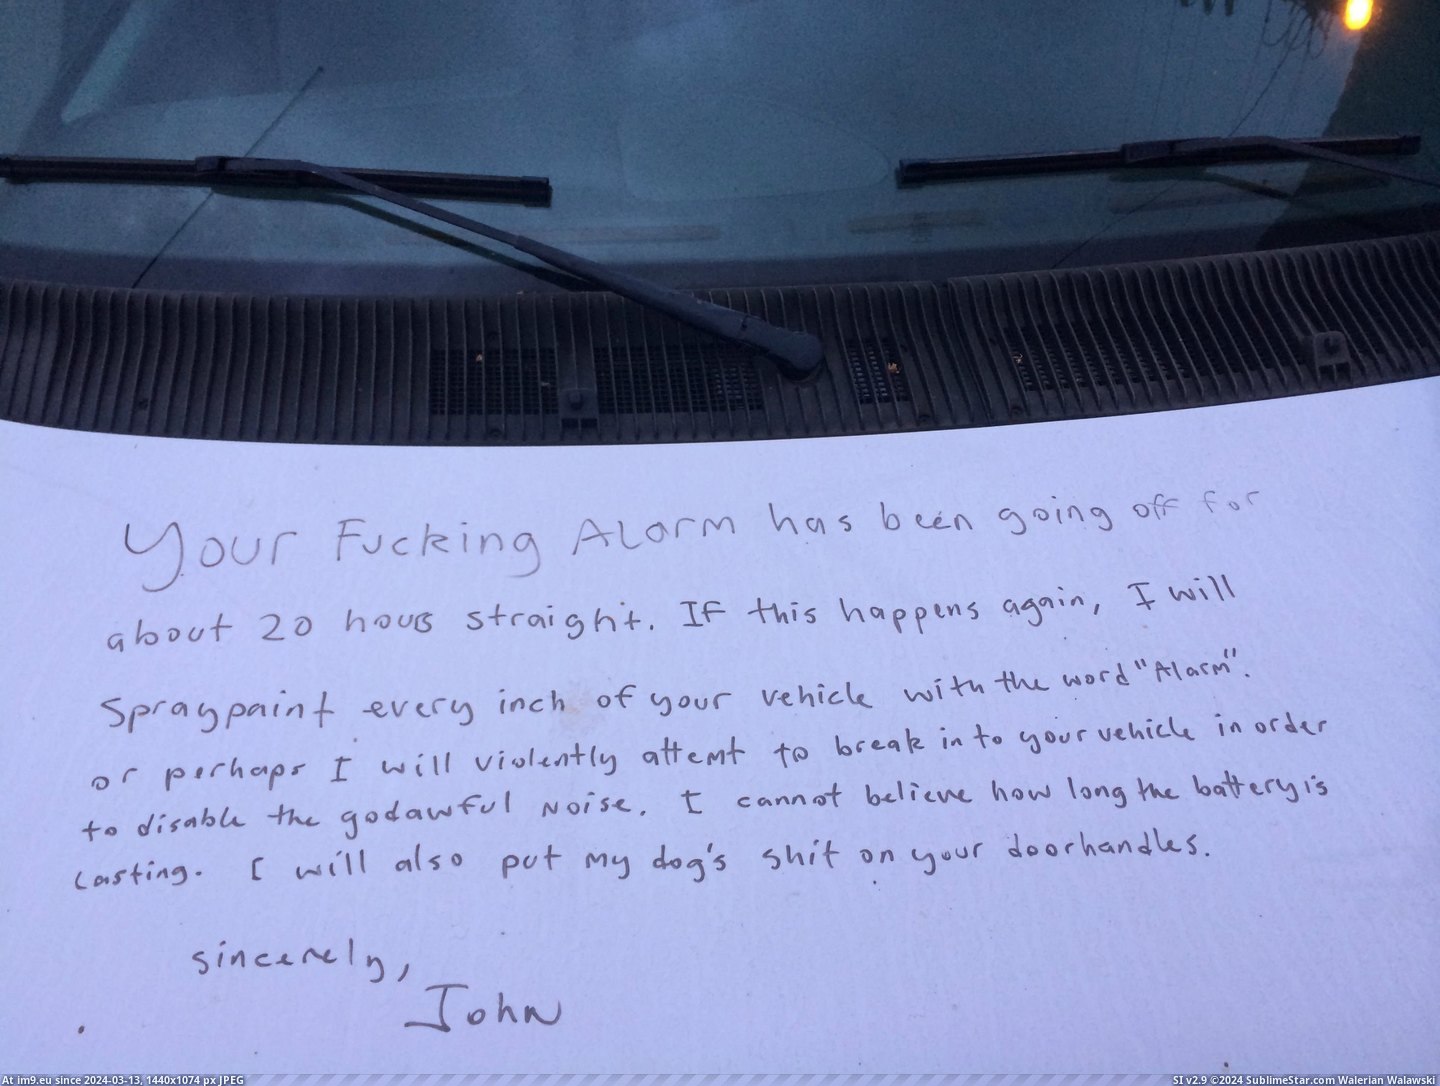 #Funny #Friend #Van #Overnight #Shift #Marker #Permanent #Find #Message #Written [Funny] My friend came back from an overnight shift to find this message written in permanent marker on his van. Pic. (Obraz z album My r/FUNNY favs))